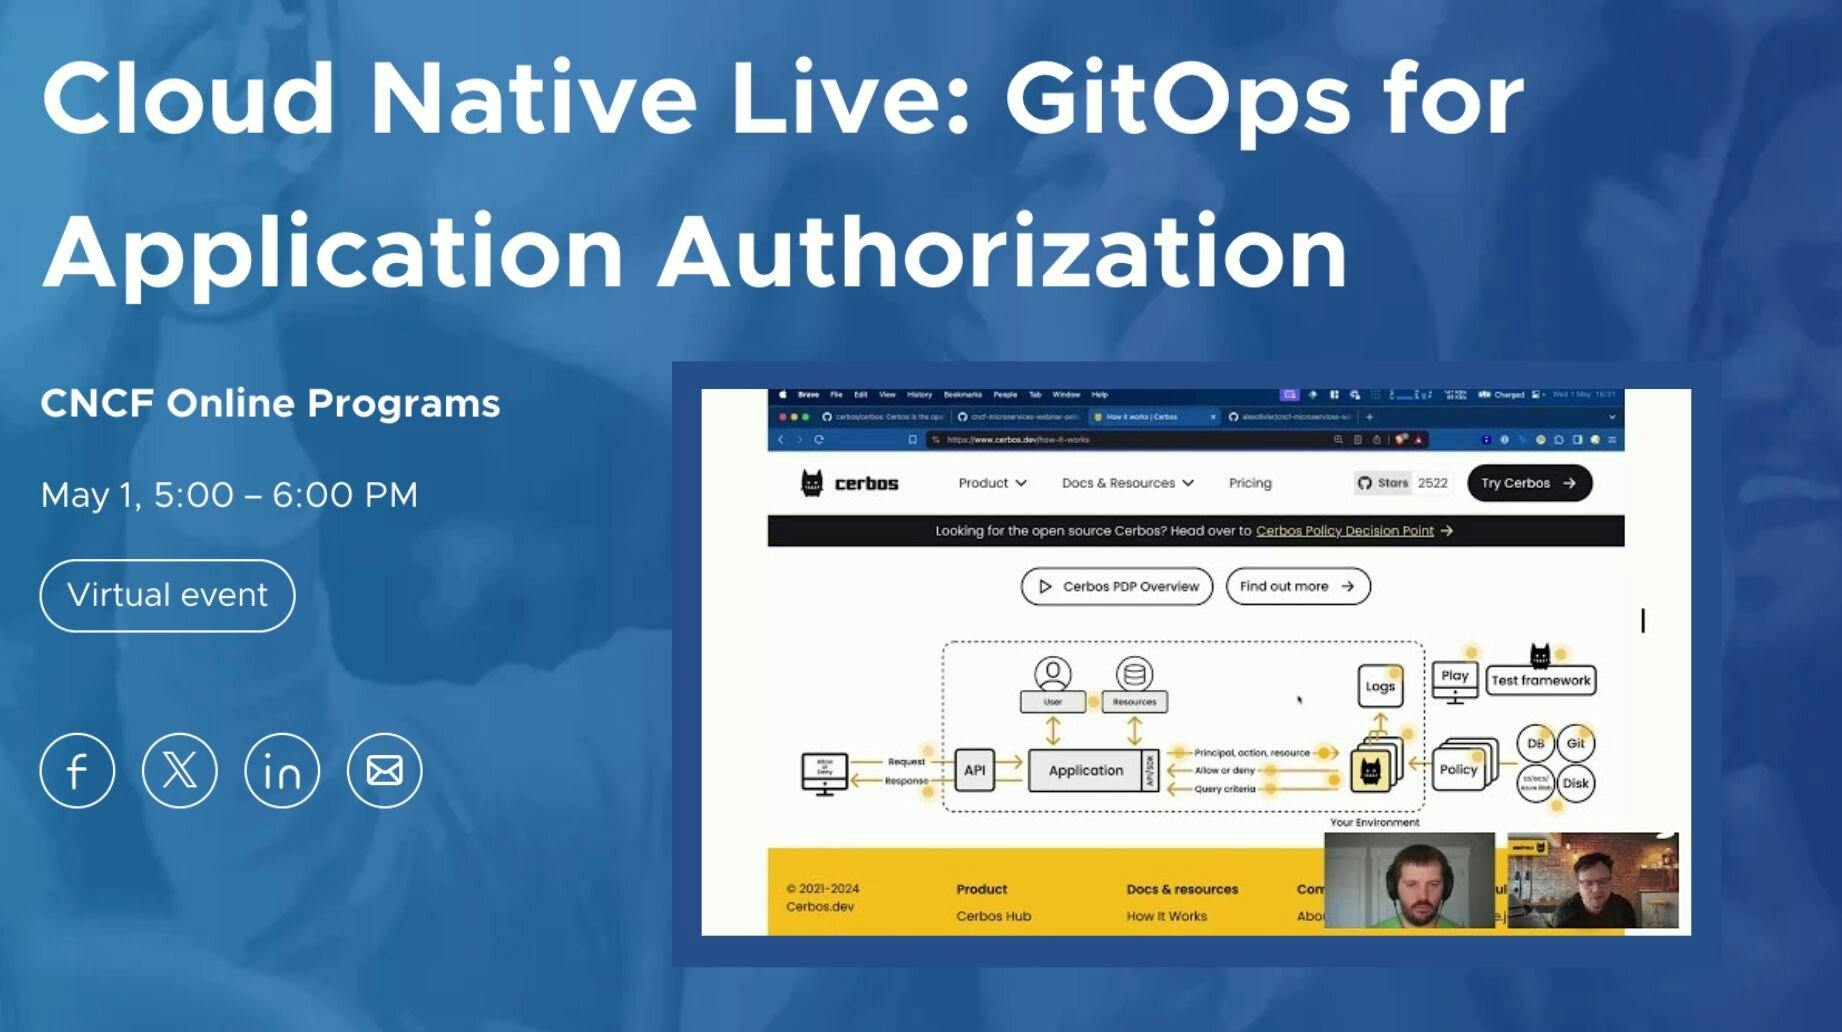 GitOps for application authorization